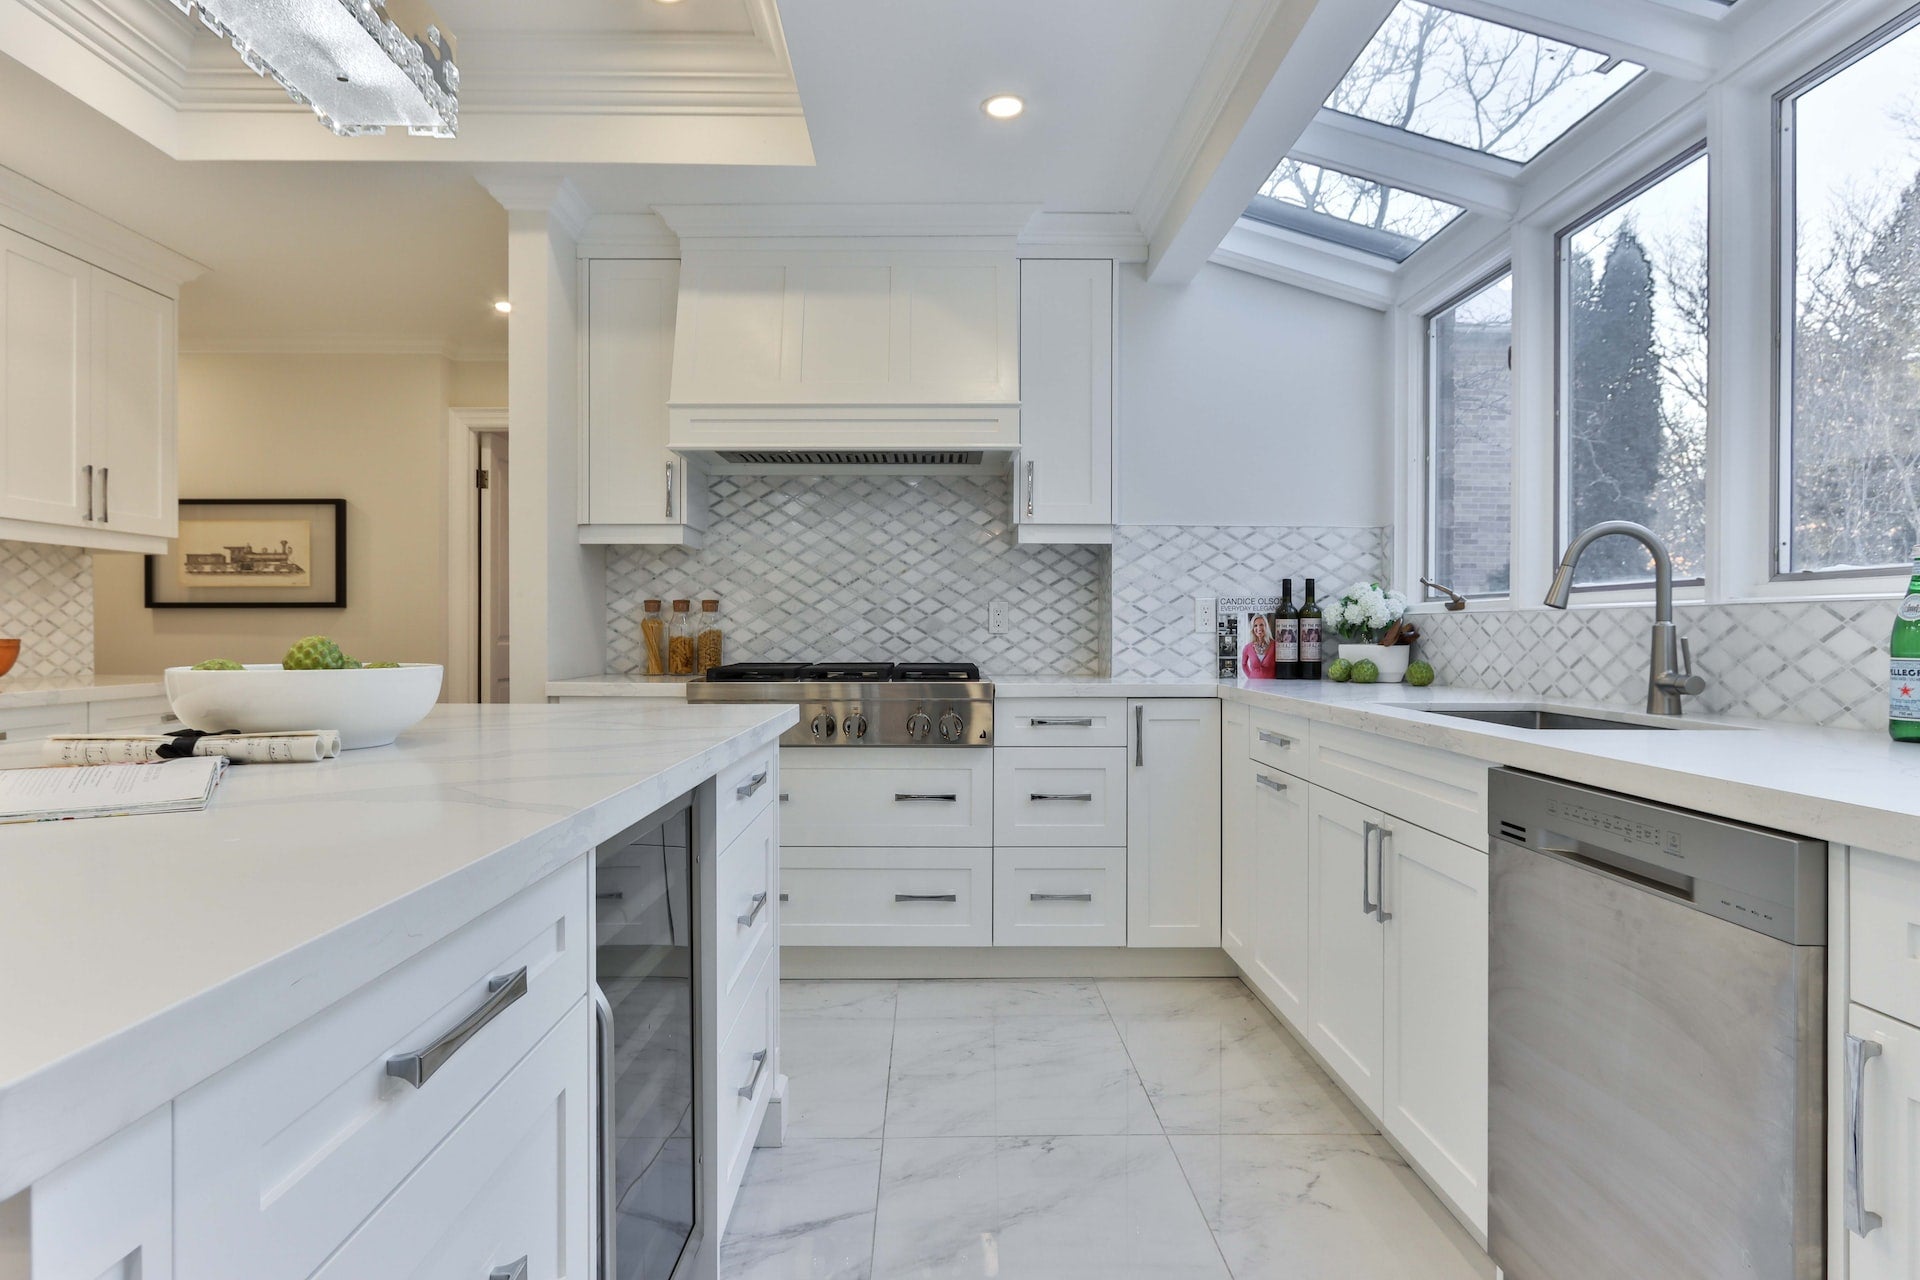 Kitchen Extensions: 6 Ways to Extend Your Space (+ Costs, Times & More)